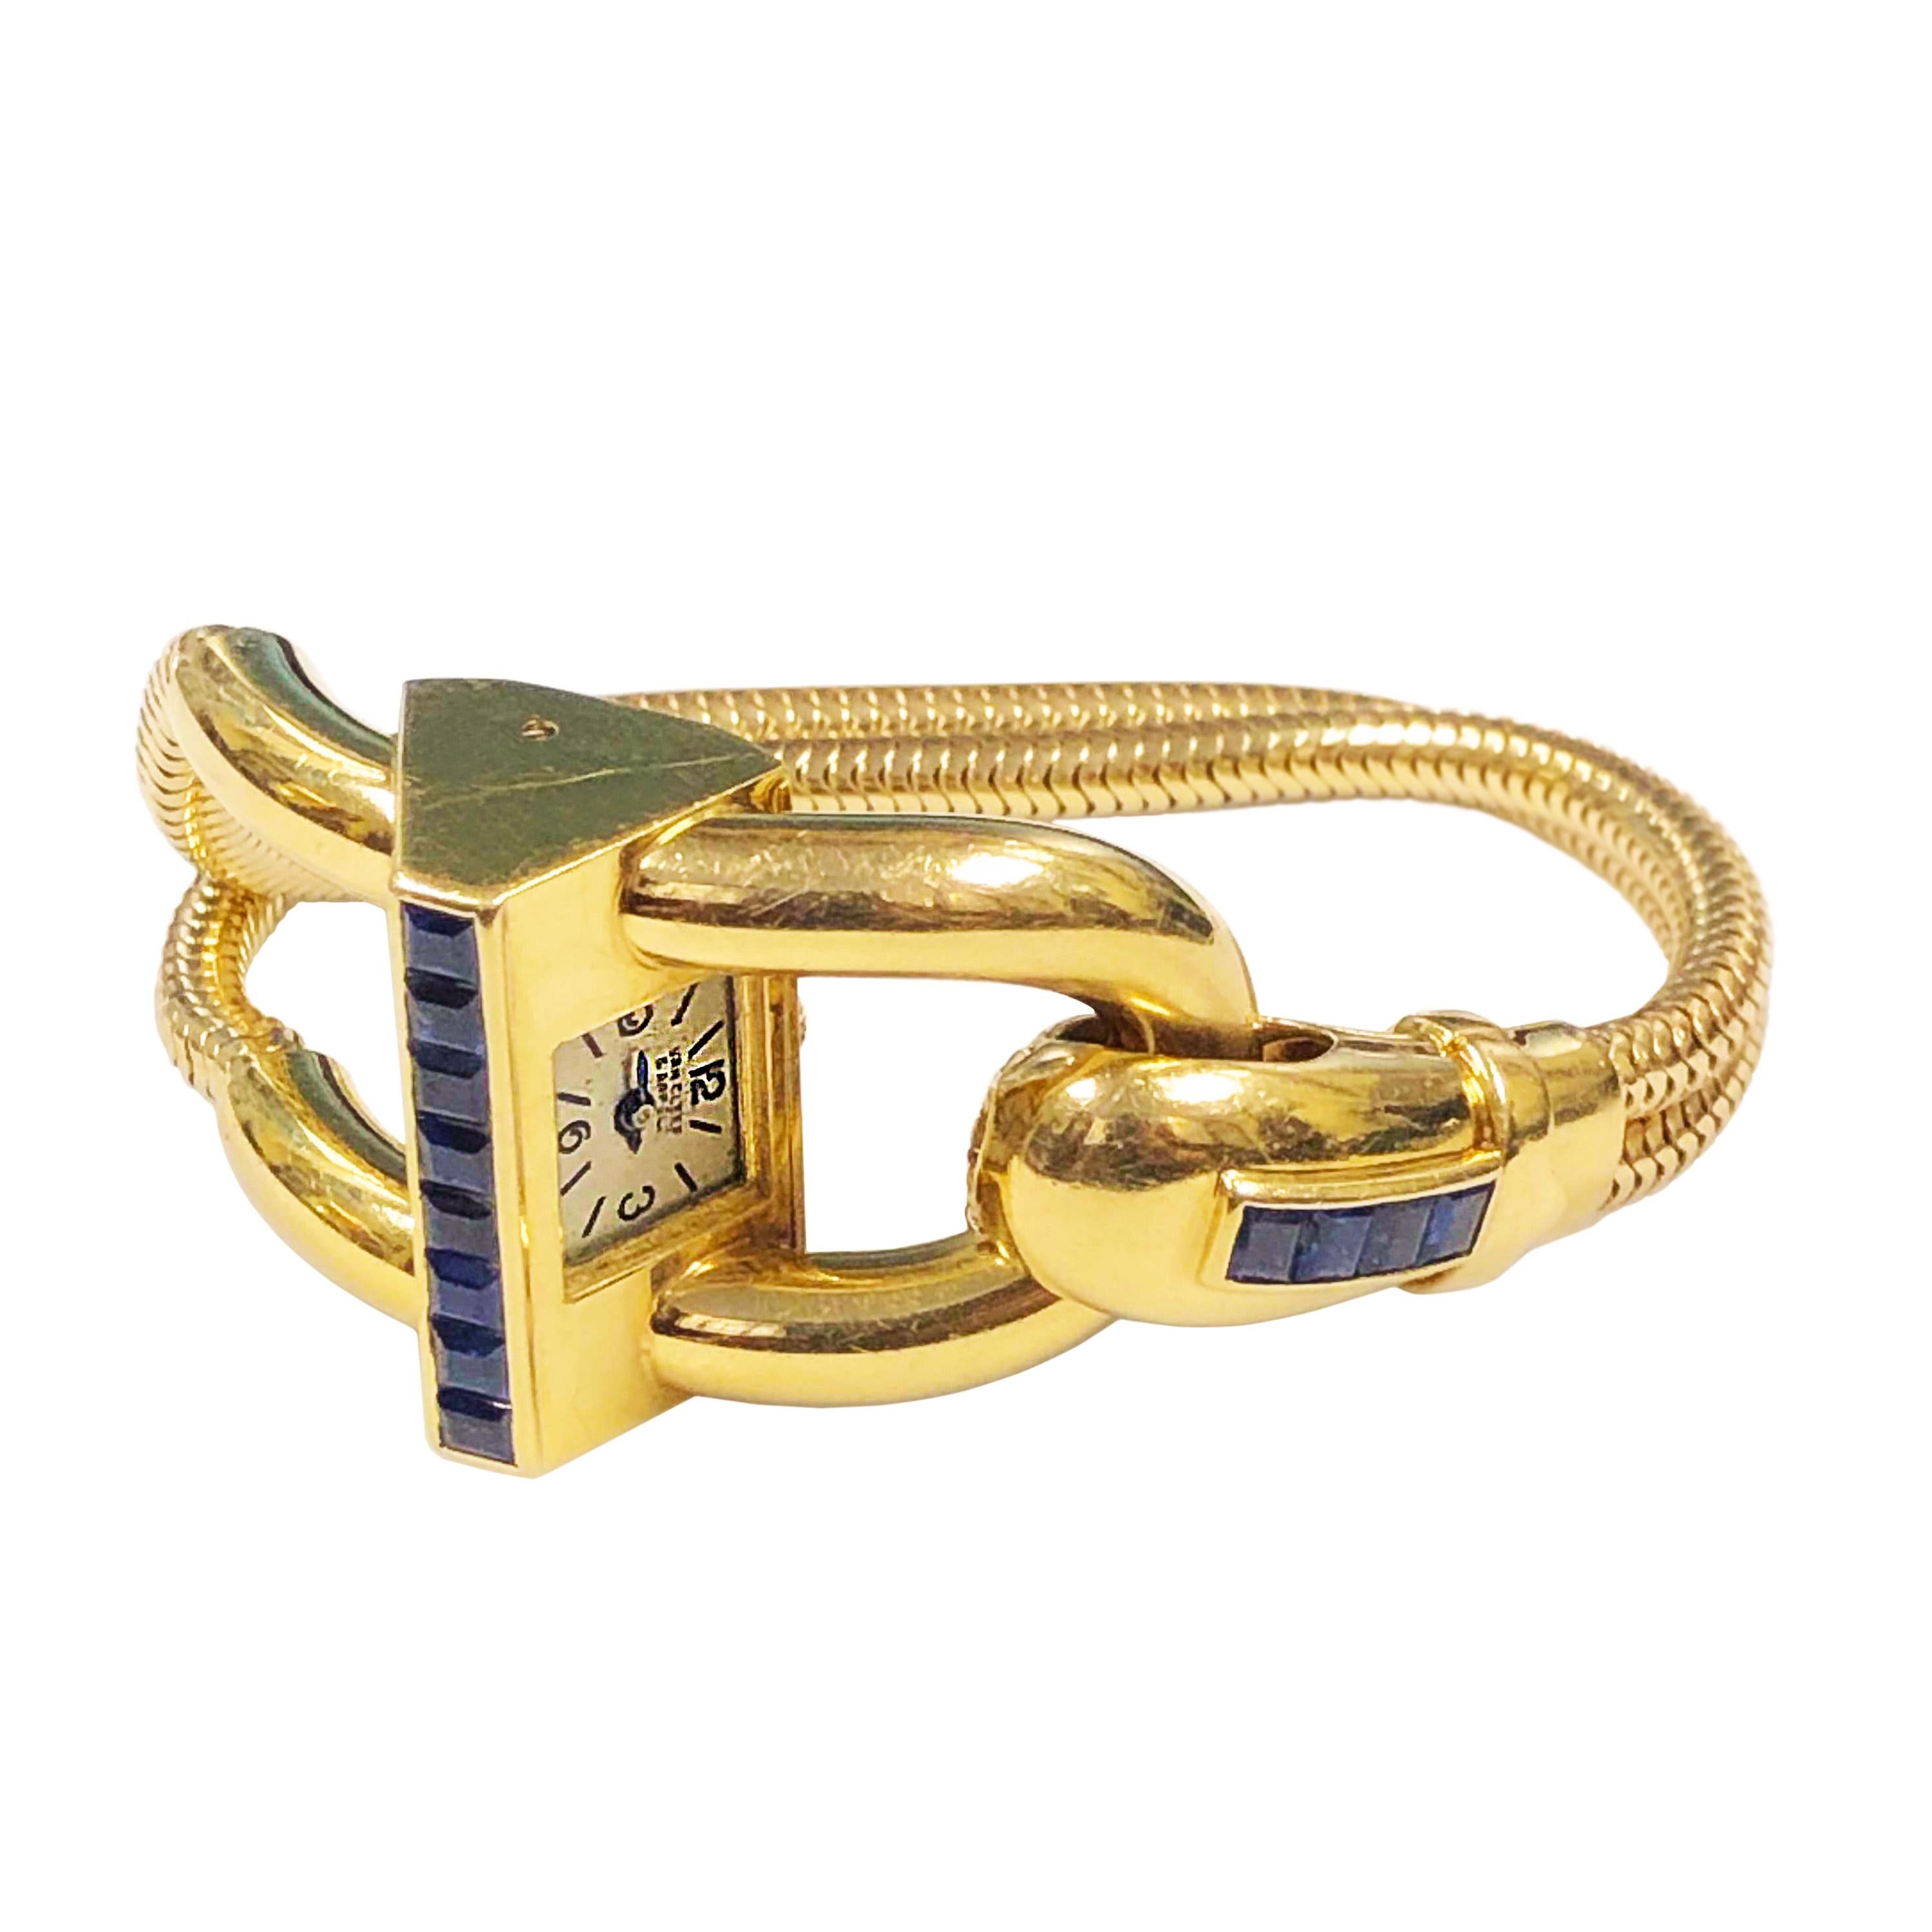 Circa 1940s Van Cleef & Arpels Cadenas 18K Yellow Gold Wrist Watch, measuring 7 inches in length and 1 inch wide, flexible snake bracelet, set with very fine color step cut Square Sapphires. 17 Jewel Mechanical, Manual wind movement, Silver Satin